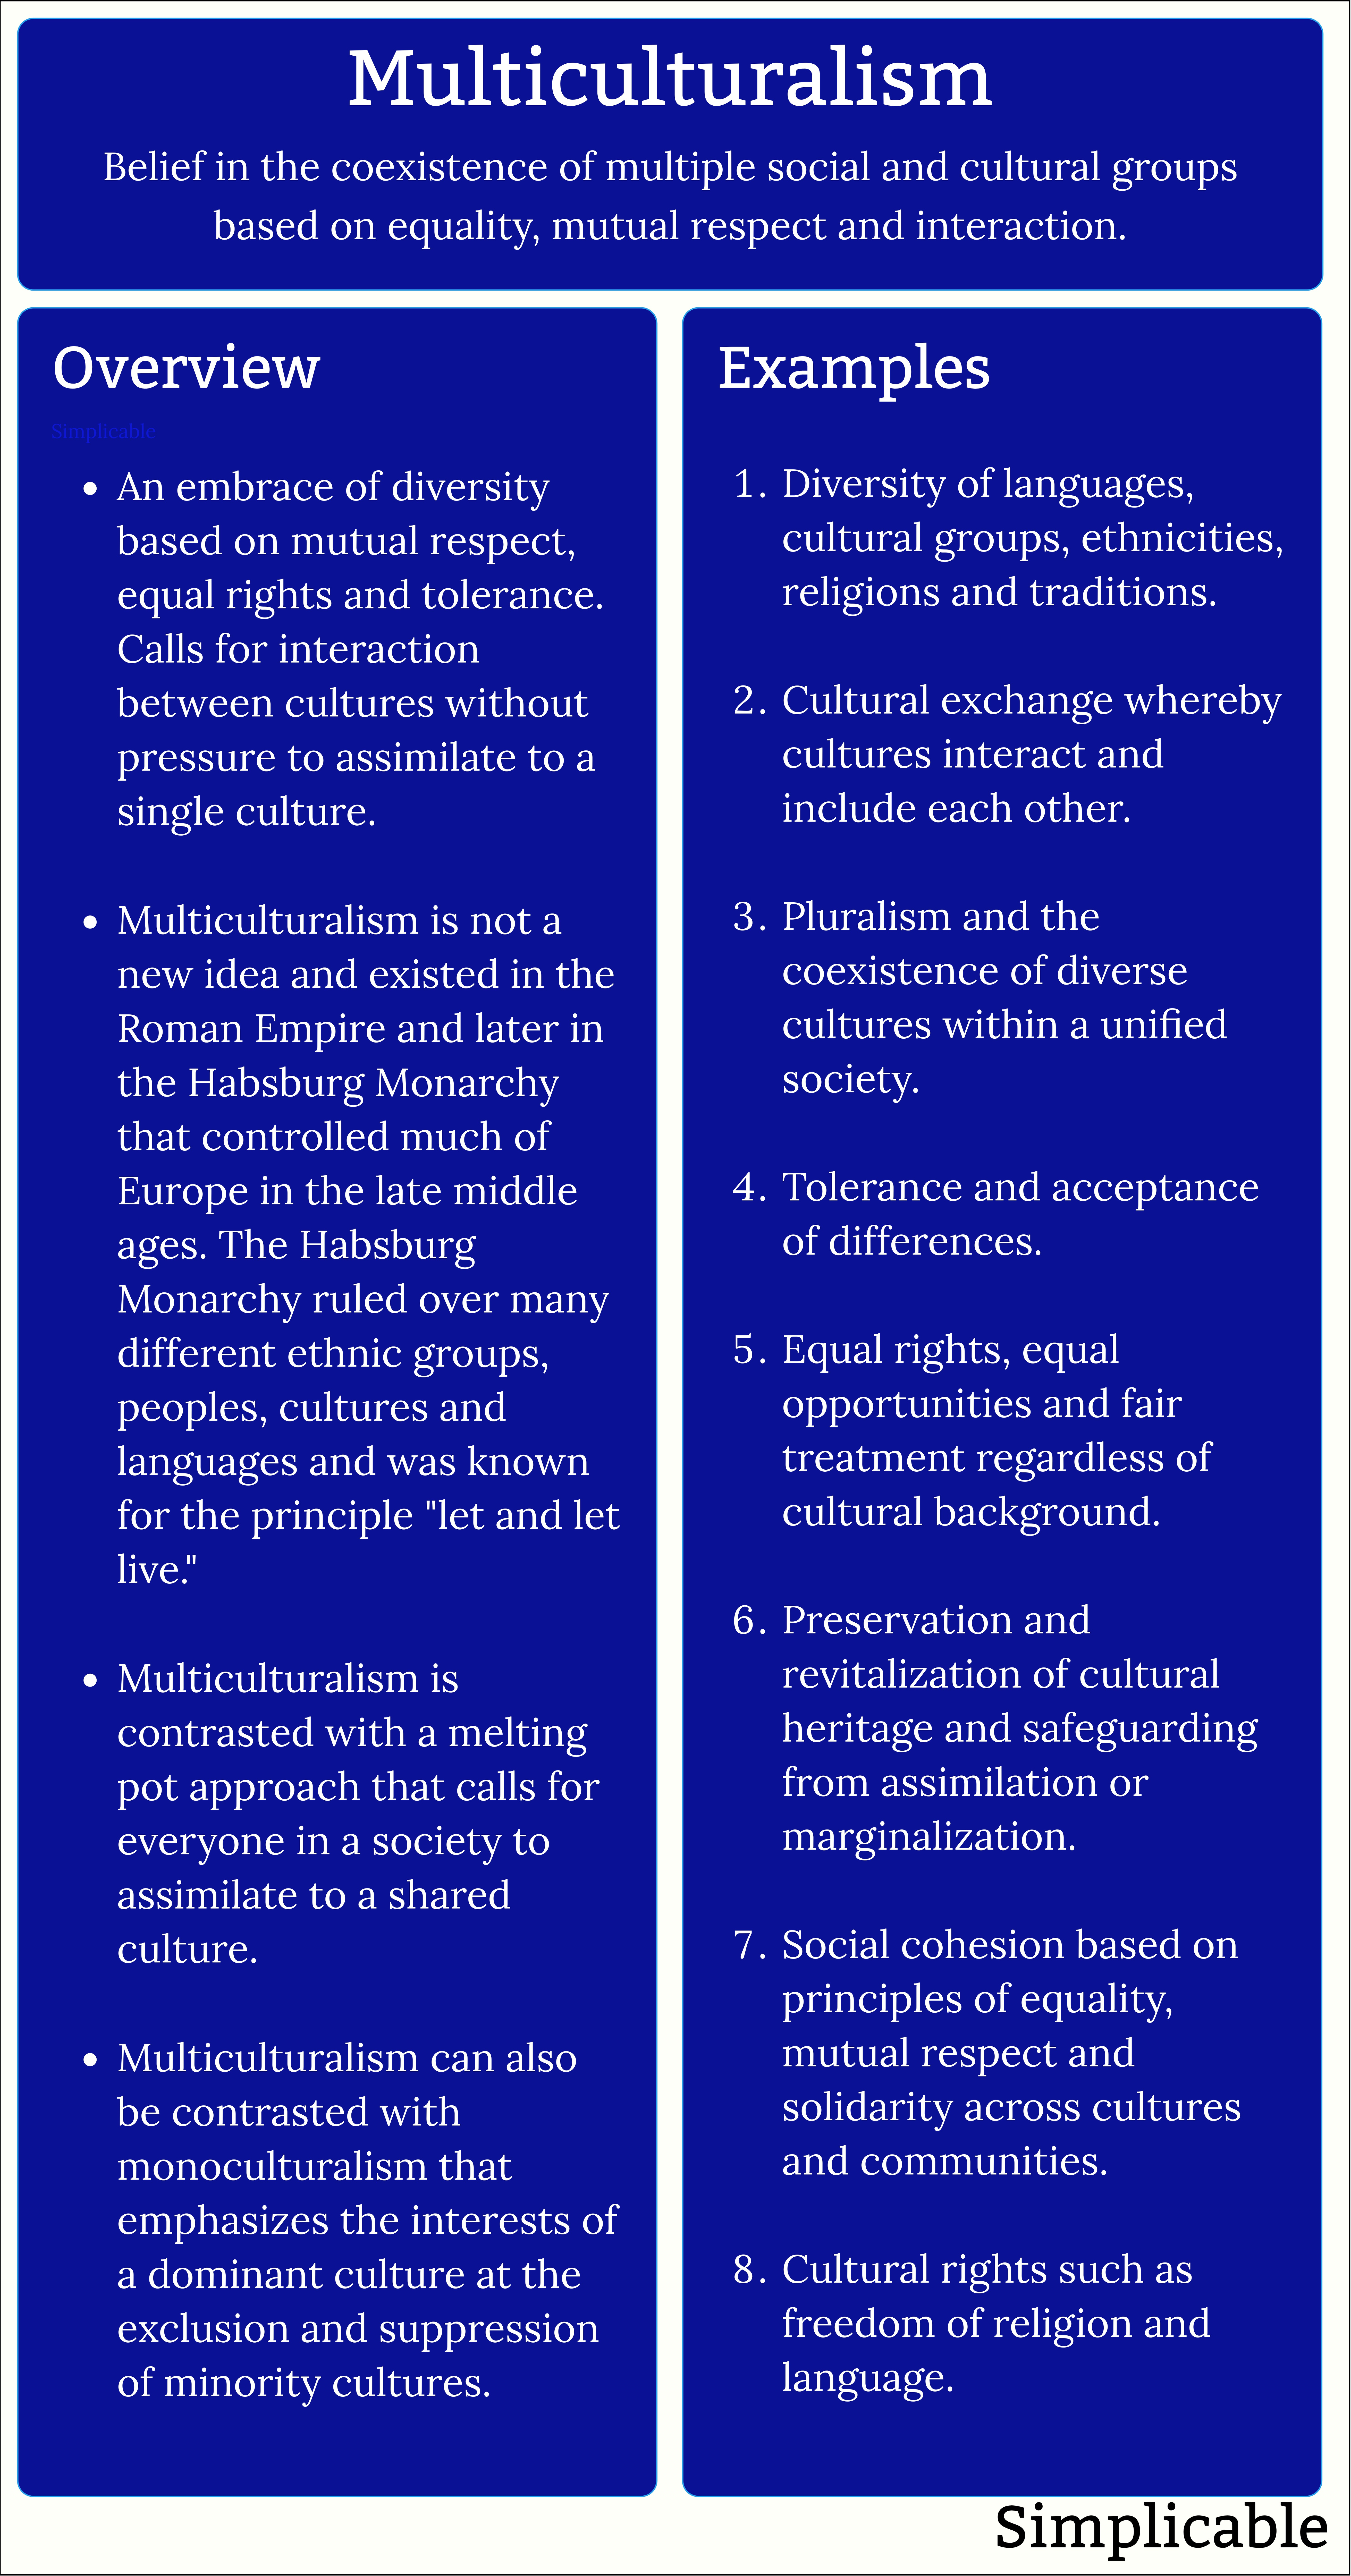 multiculturalism overview and examples